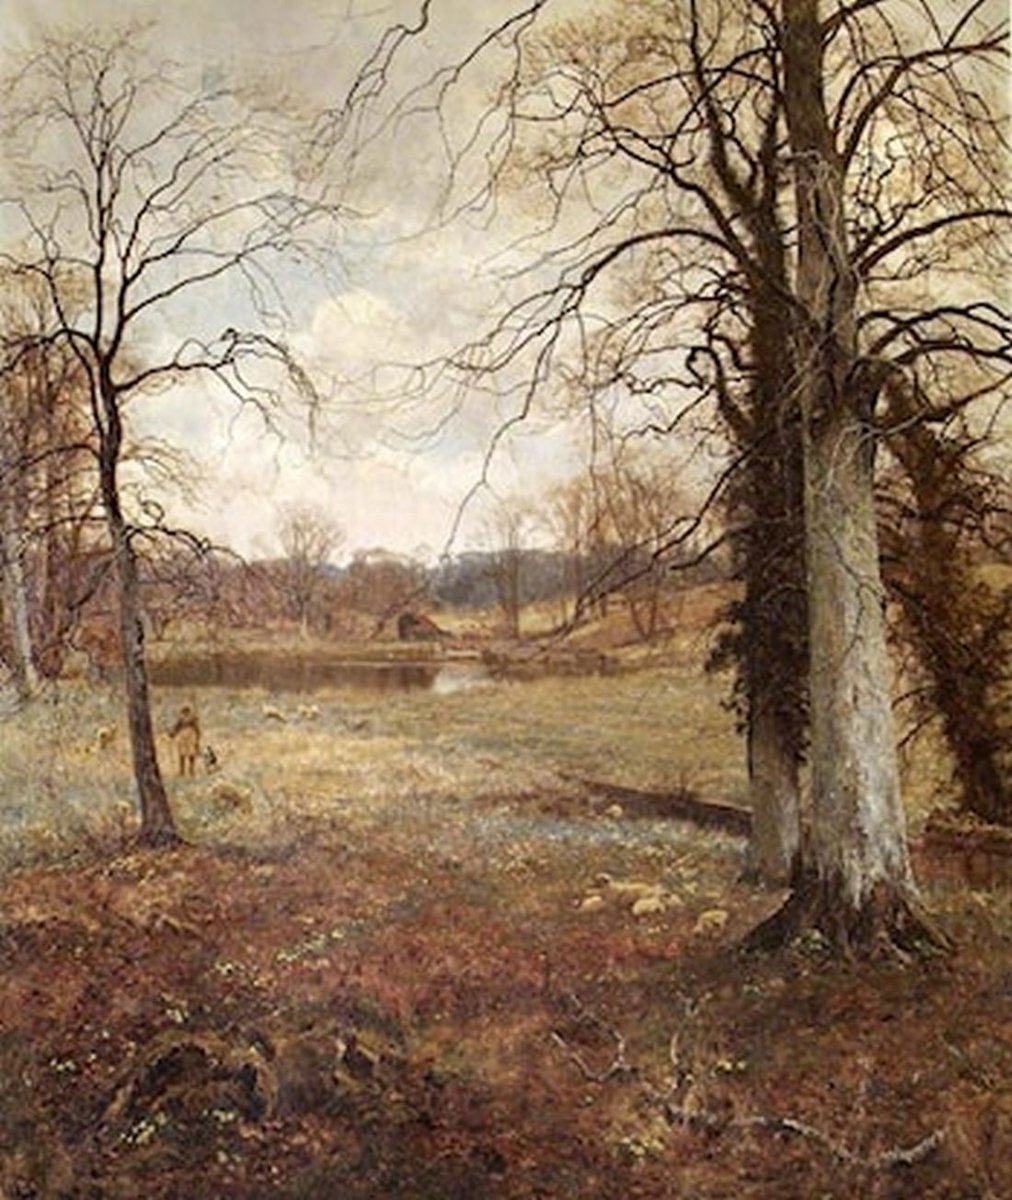 Early Spring at Abinger (1895) by Edward Wilkins Waite (English artist, lived 1854-1924). “You can cut all the flowers but you cannot keep spring from coming.”